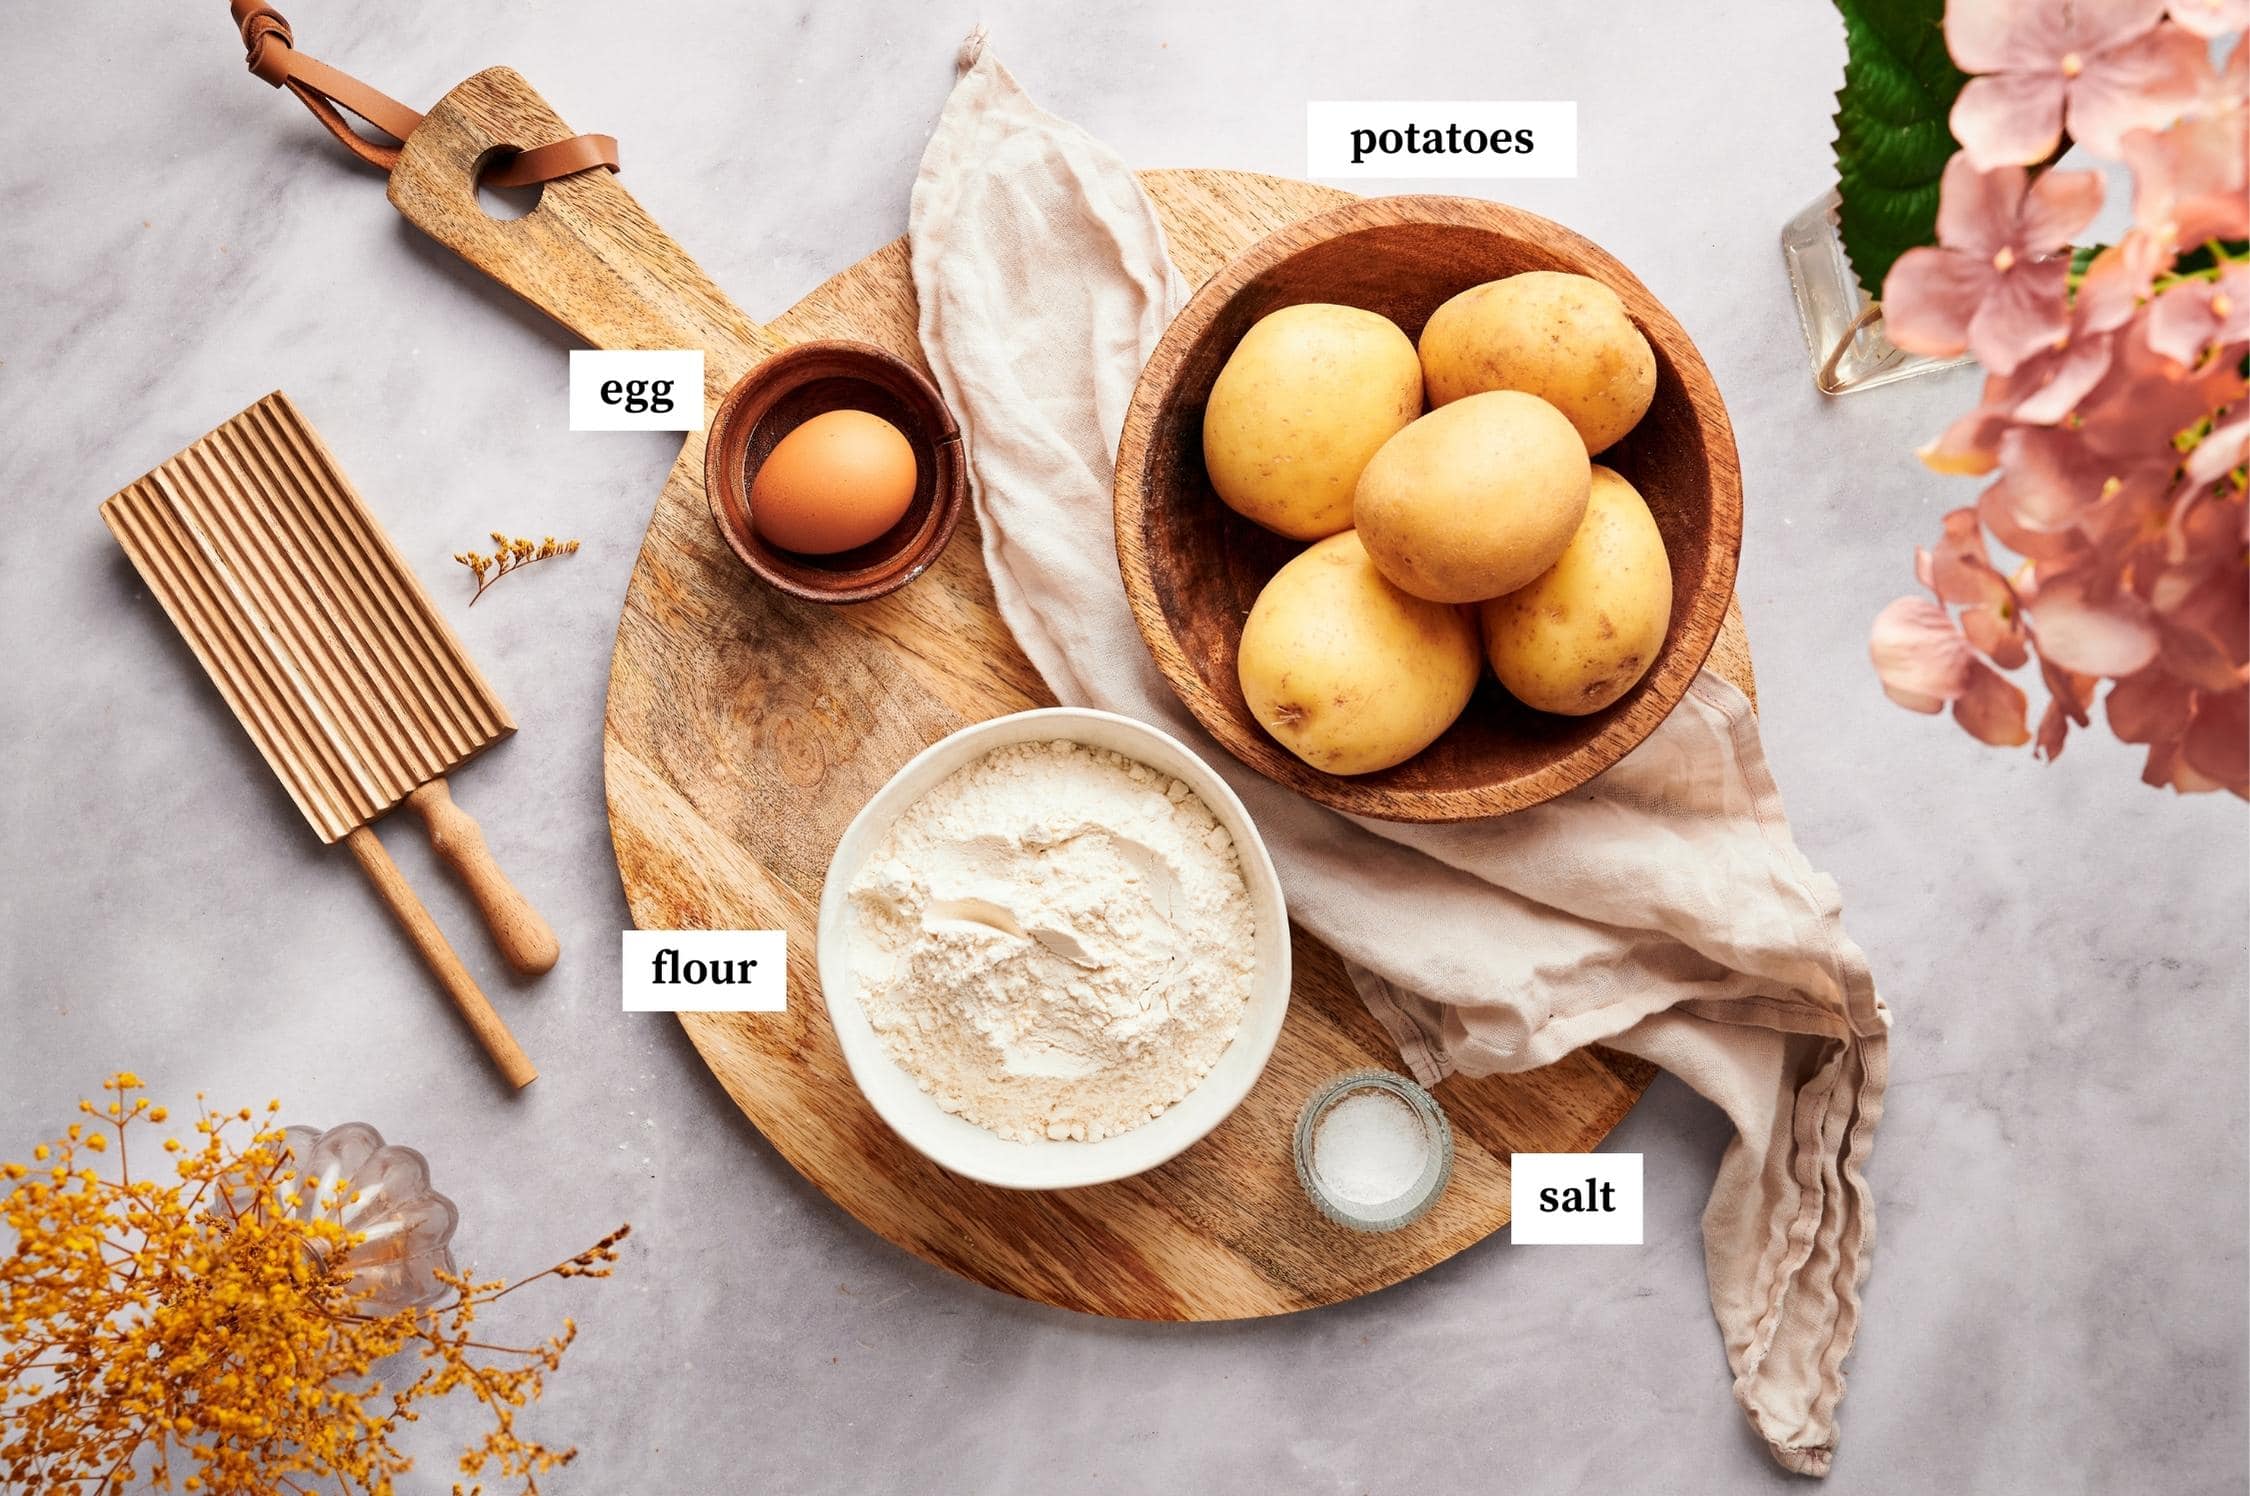 ingredients of potato gnocchi, potatoes in a wooden bowl, egg, bowl of flour, and salt, on top of a round chopping board